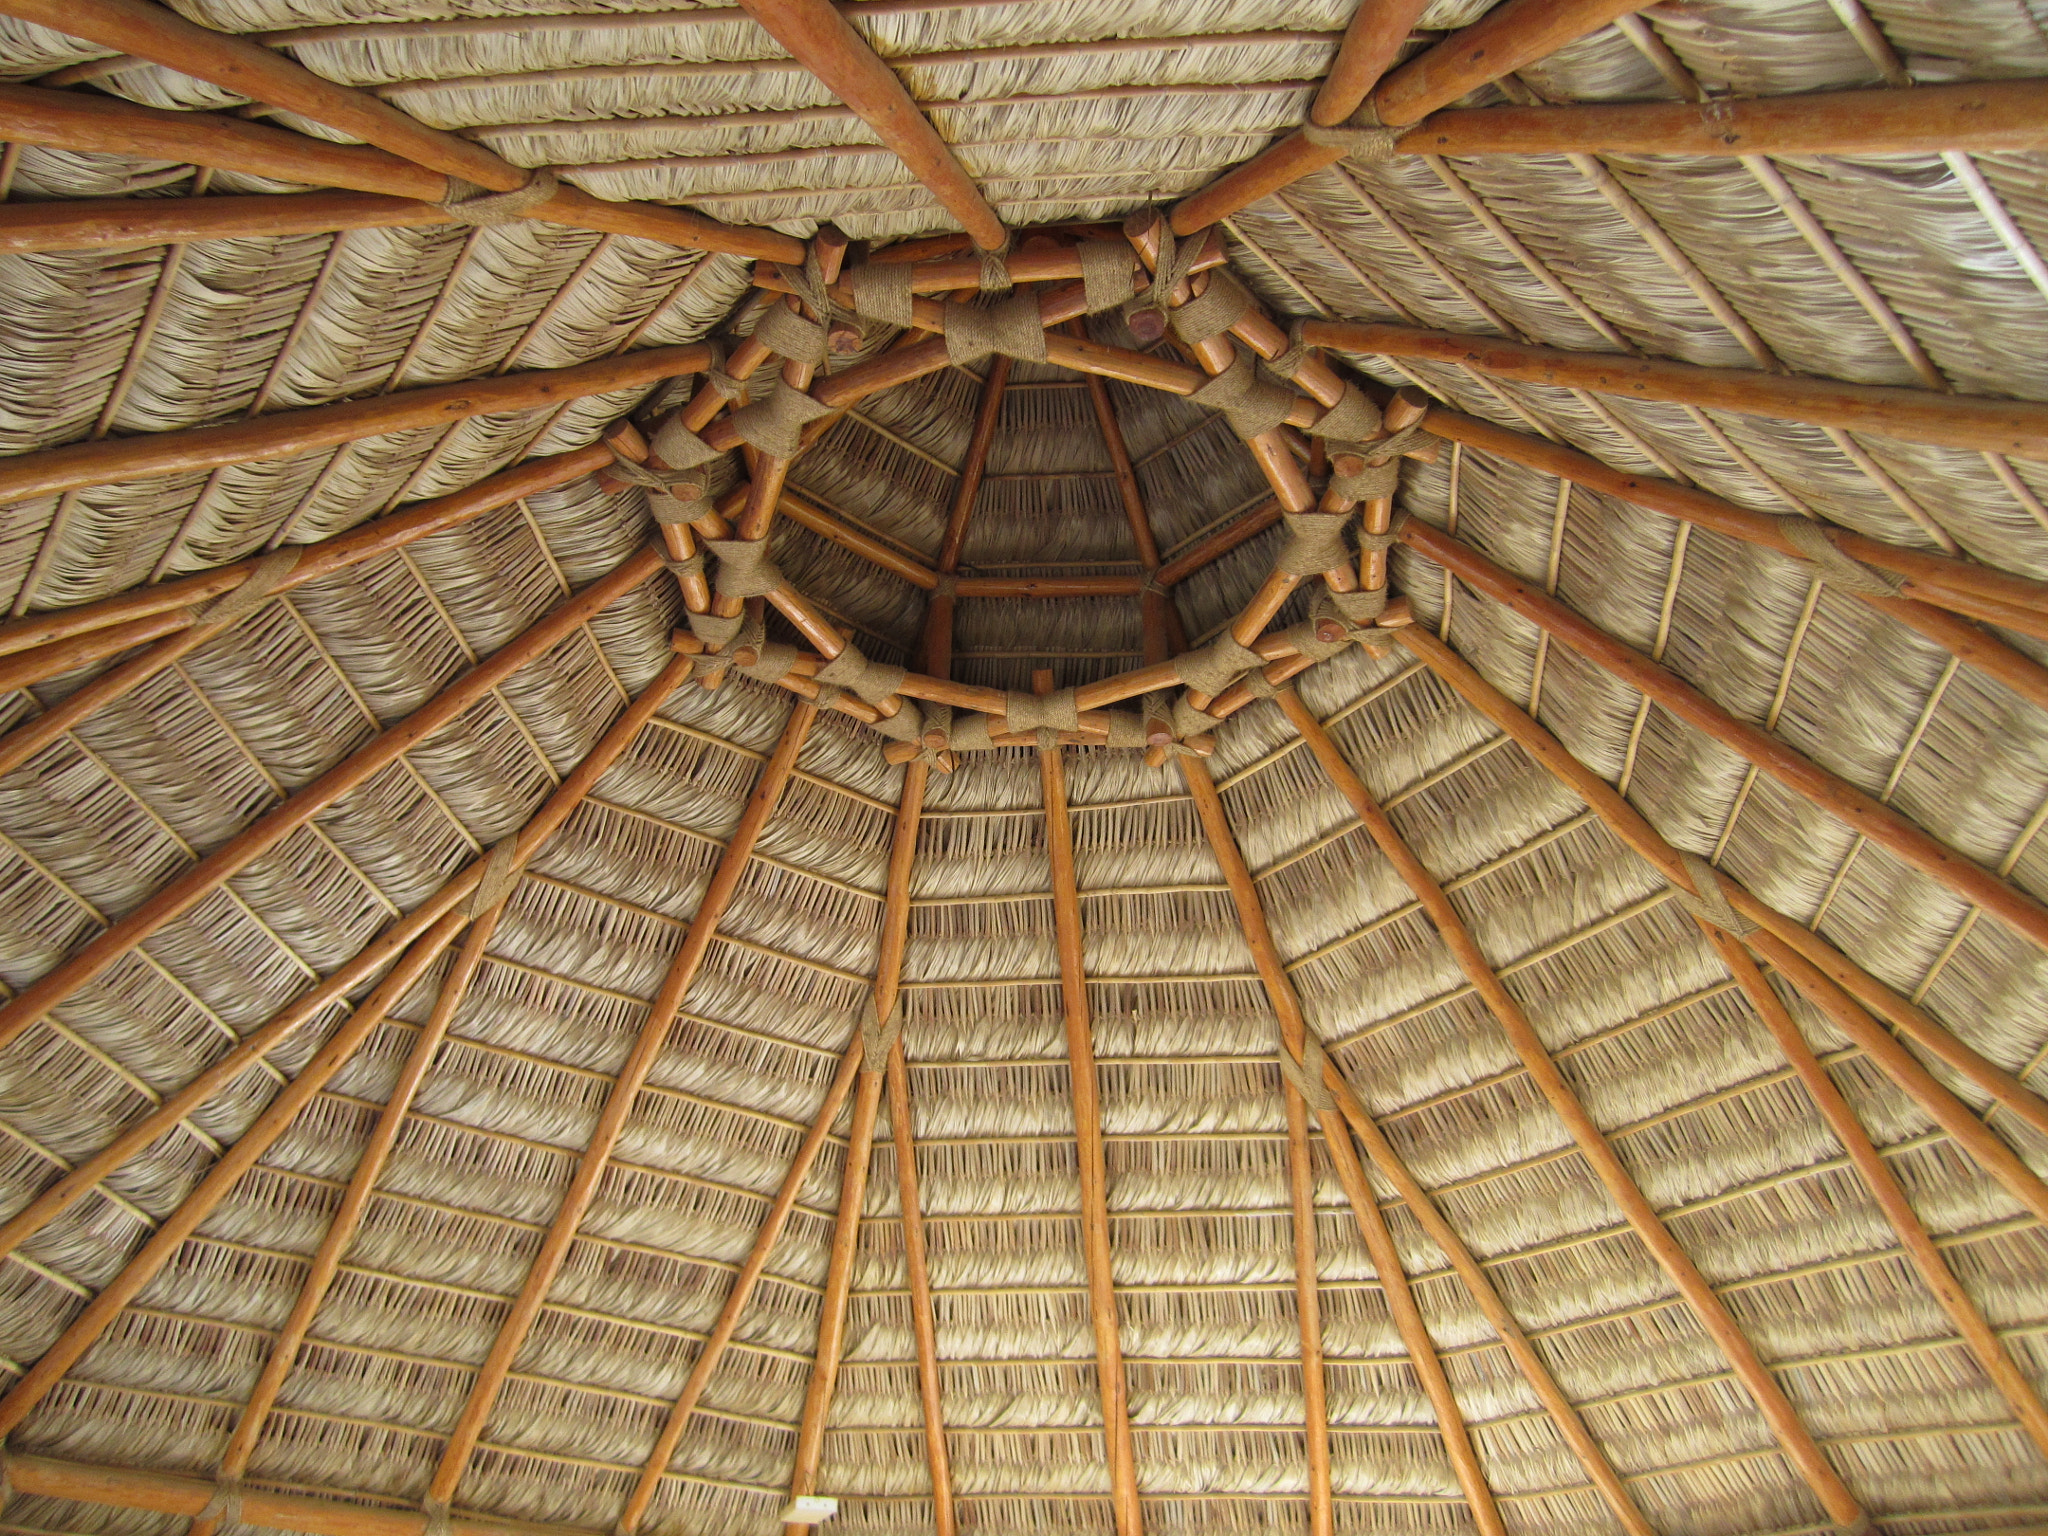 Canon PowerShot SD1400 IS (IXUS 130 / IXY 400F) sample photo. Cabo wood thatched hut roof photography